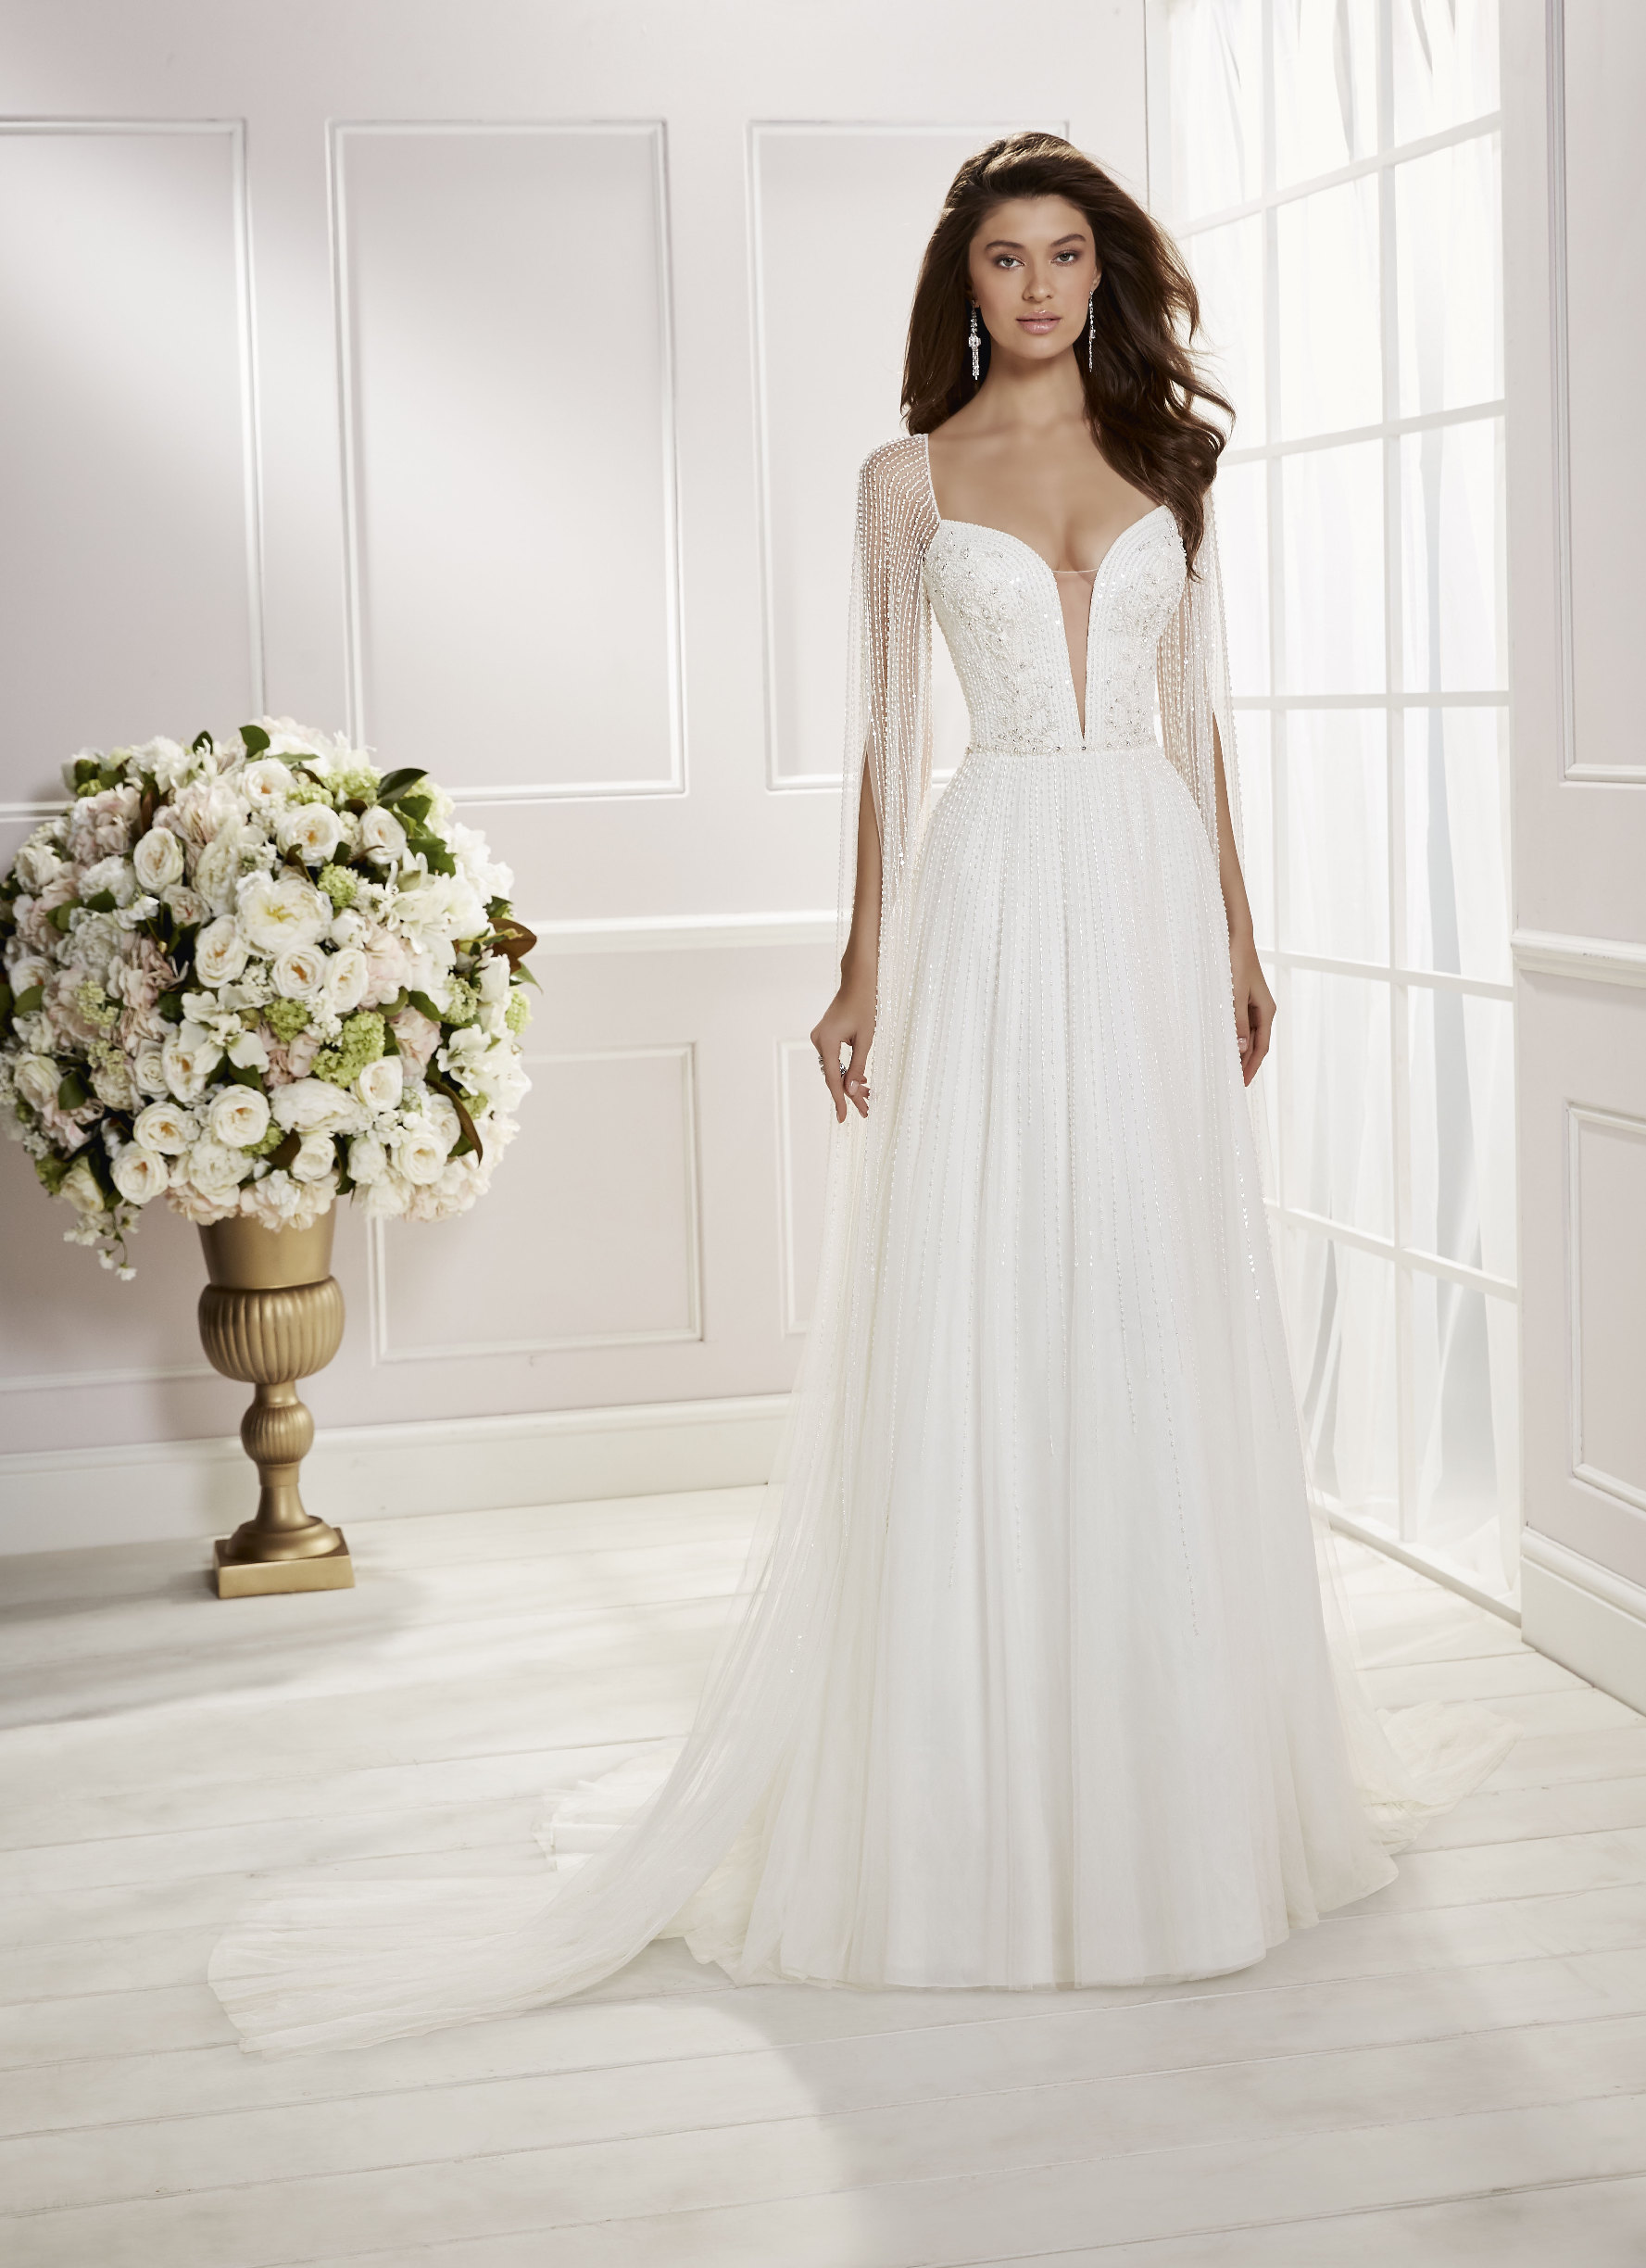 Brunette model stood in a white room by cream flowers in Ronald Joyce 69467, an ivory beaded A-line wedding dress with illusion beaded cape sleeves and a deep plunging neckline